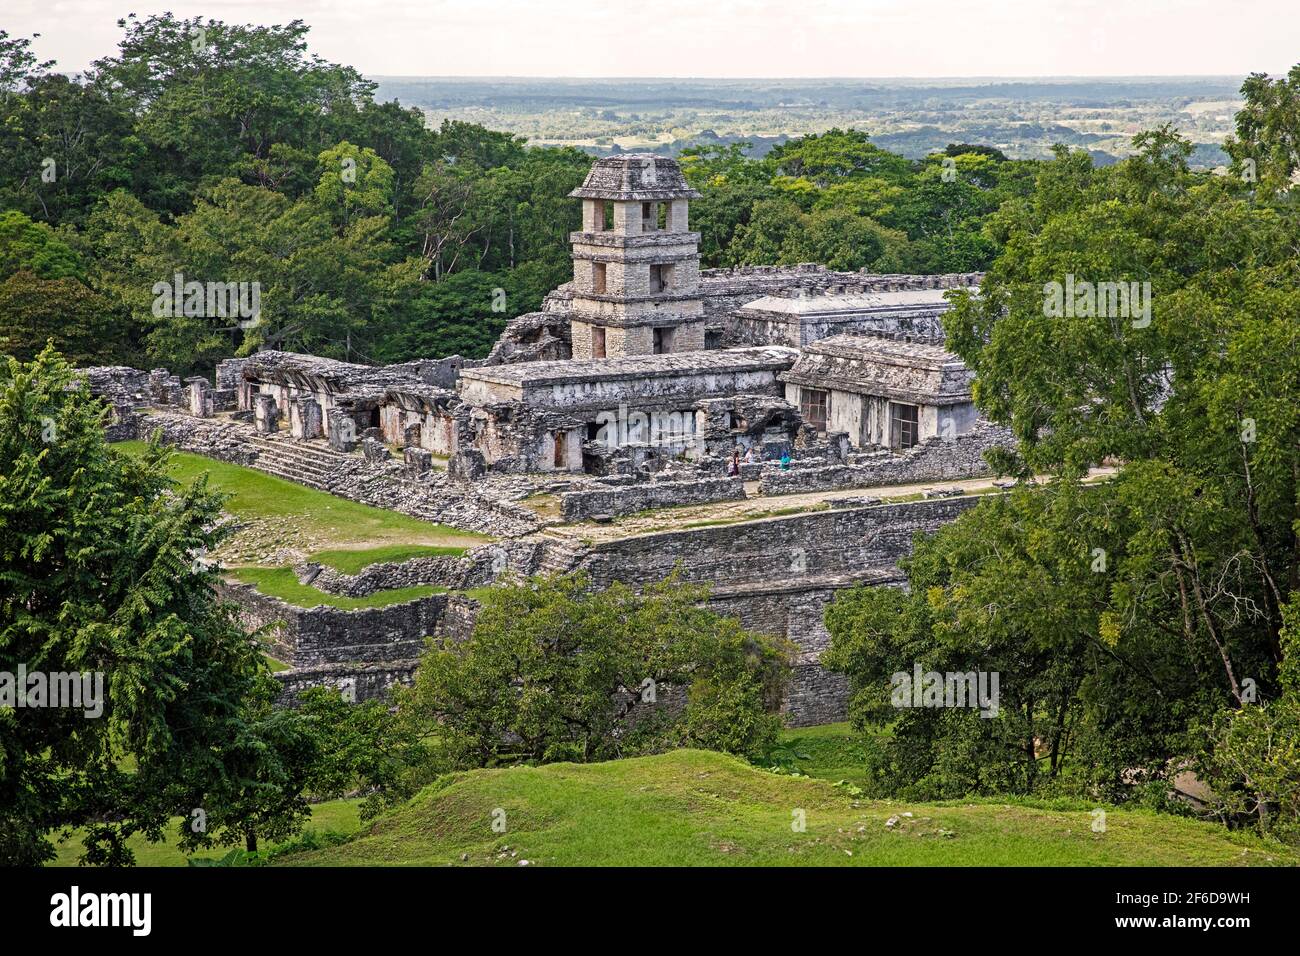 Palace with Observation Tower at the pre-Columbian Maya civilization site of Palenque, Chiapas, southern Mexico Stock Photo